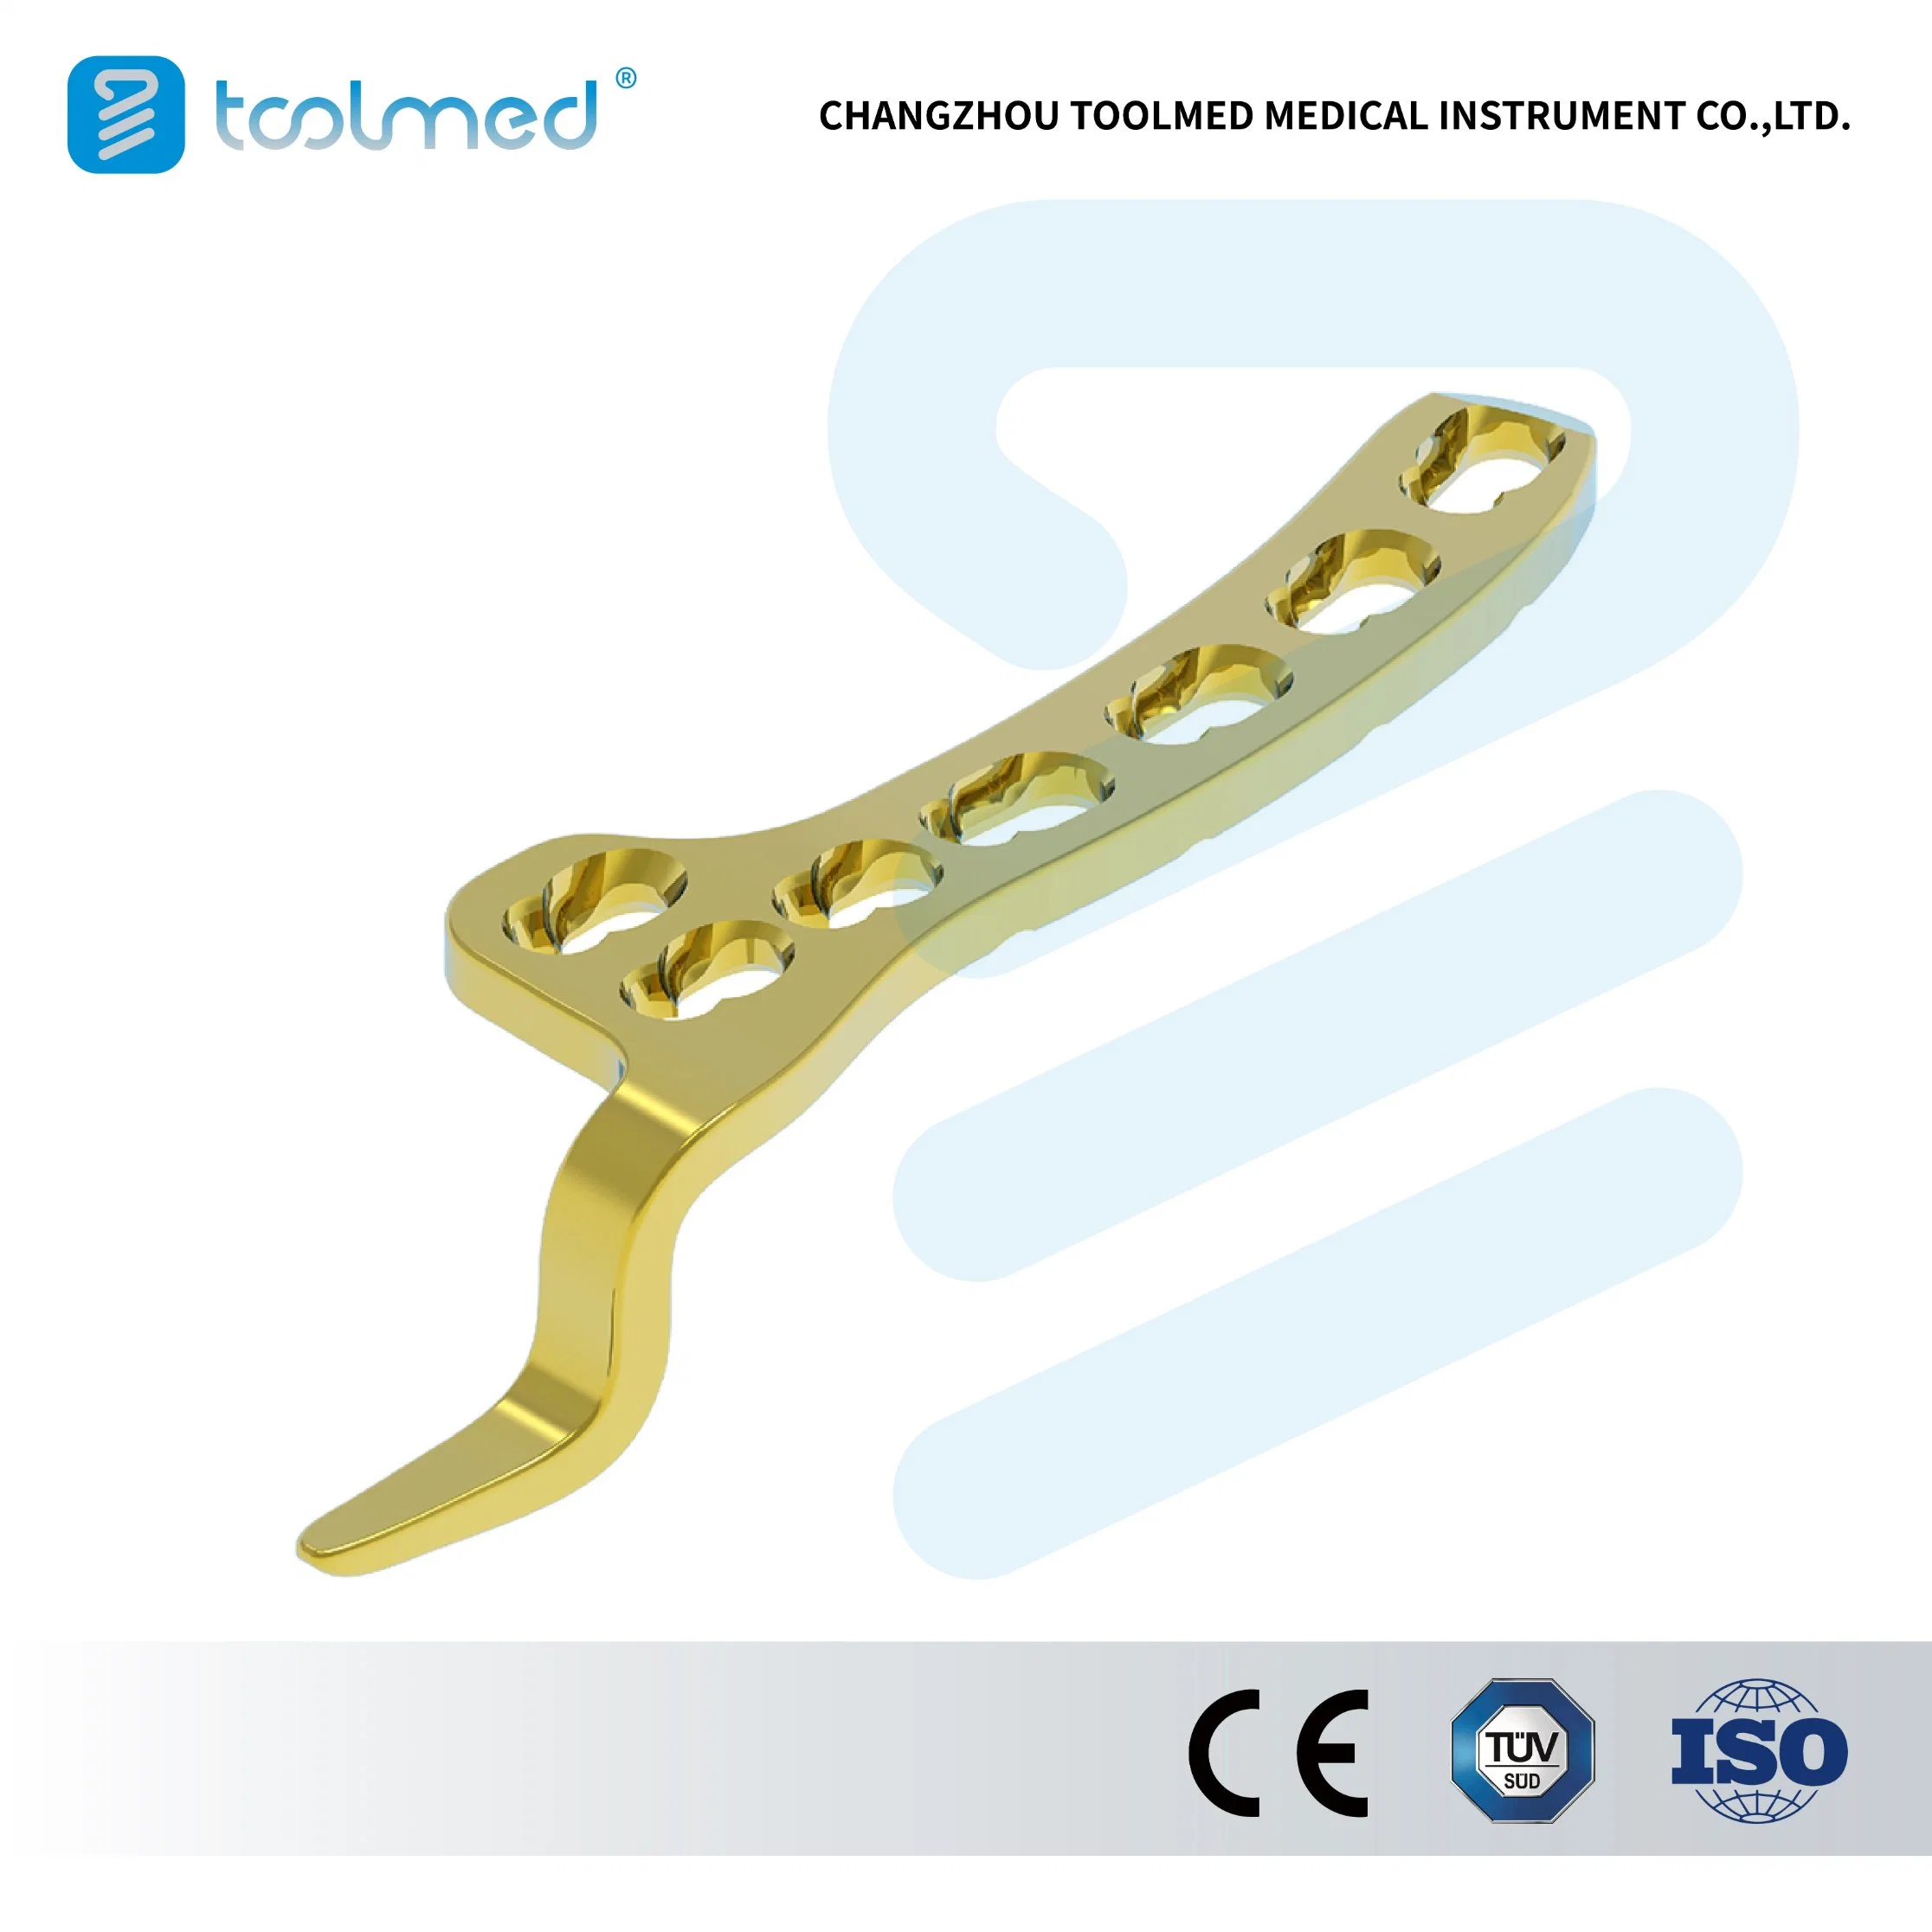 Clavicle Hook Locking Compression Bone Plate, Small Fragment LCP System, Titanium, Orthopedic Surgical Implant for Trauma Surgery, Medical Products with CE&ISO